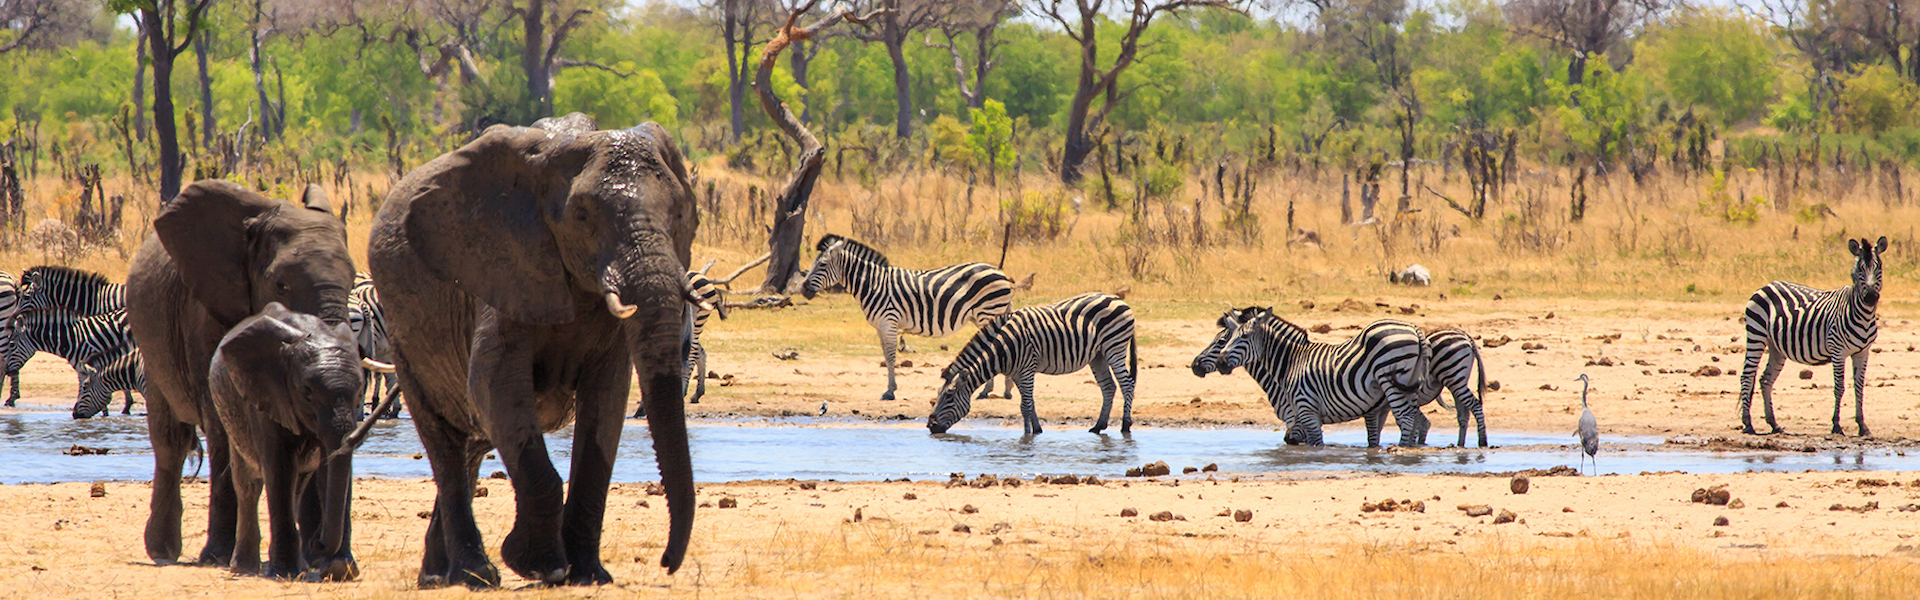 Sothern Africa Safari with elephants and zebras